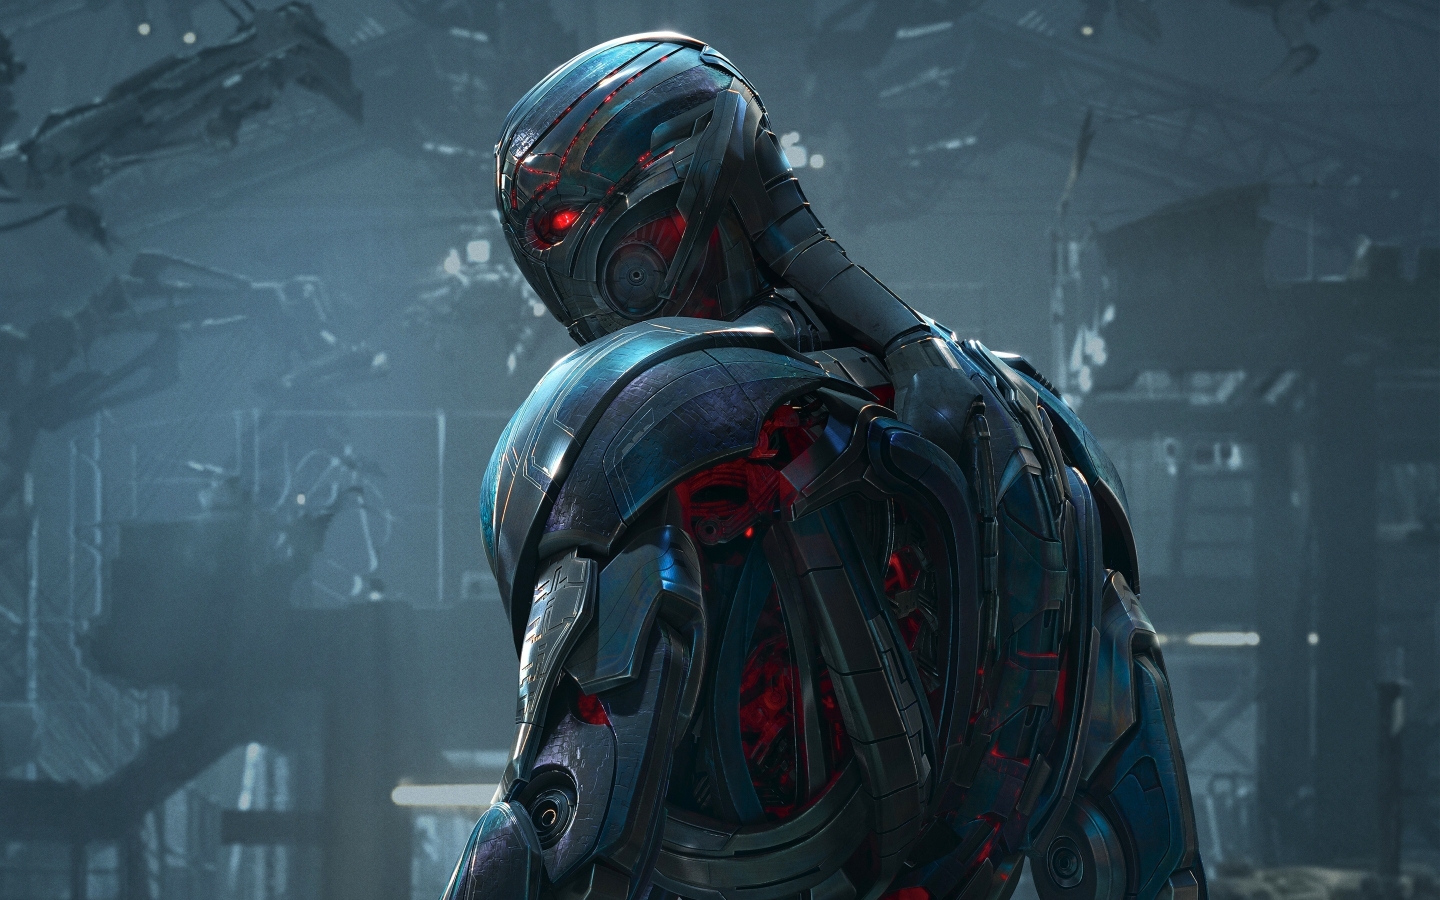 Ultron from Avengers for 1440 x 900 widescreen resolution